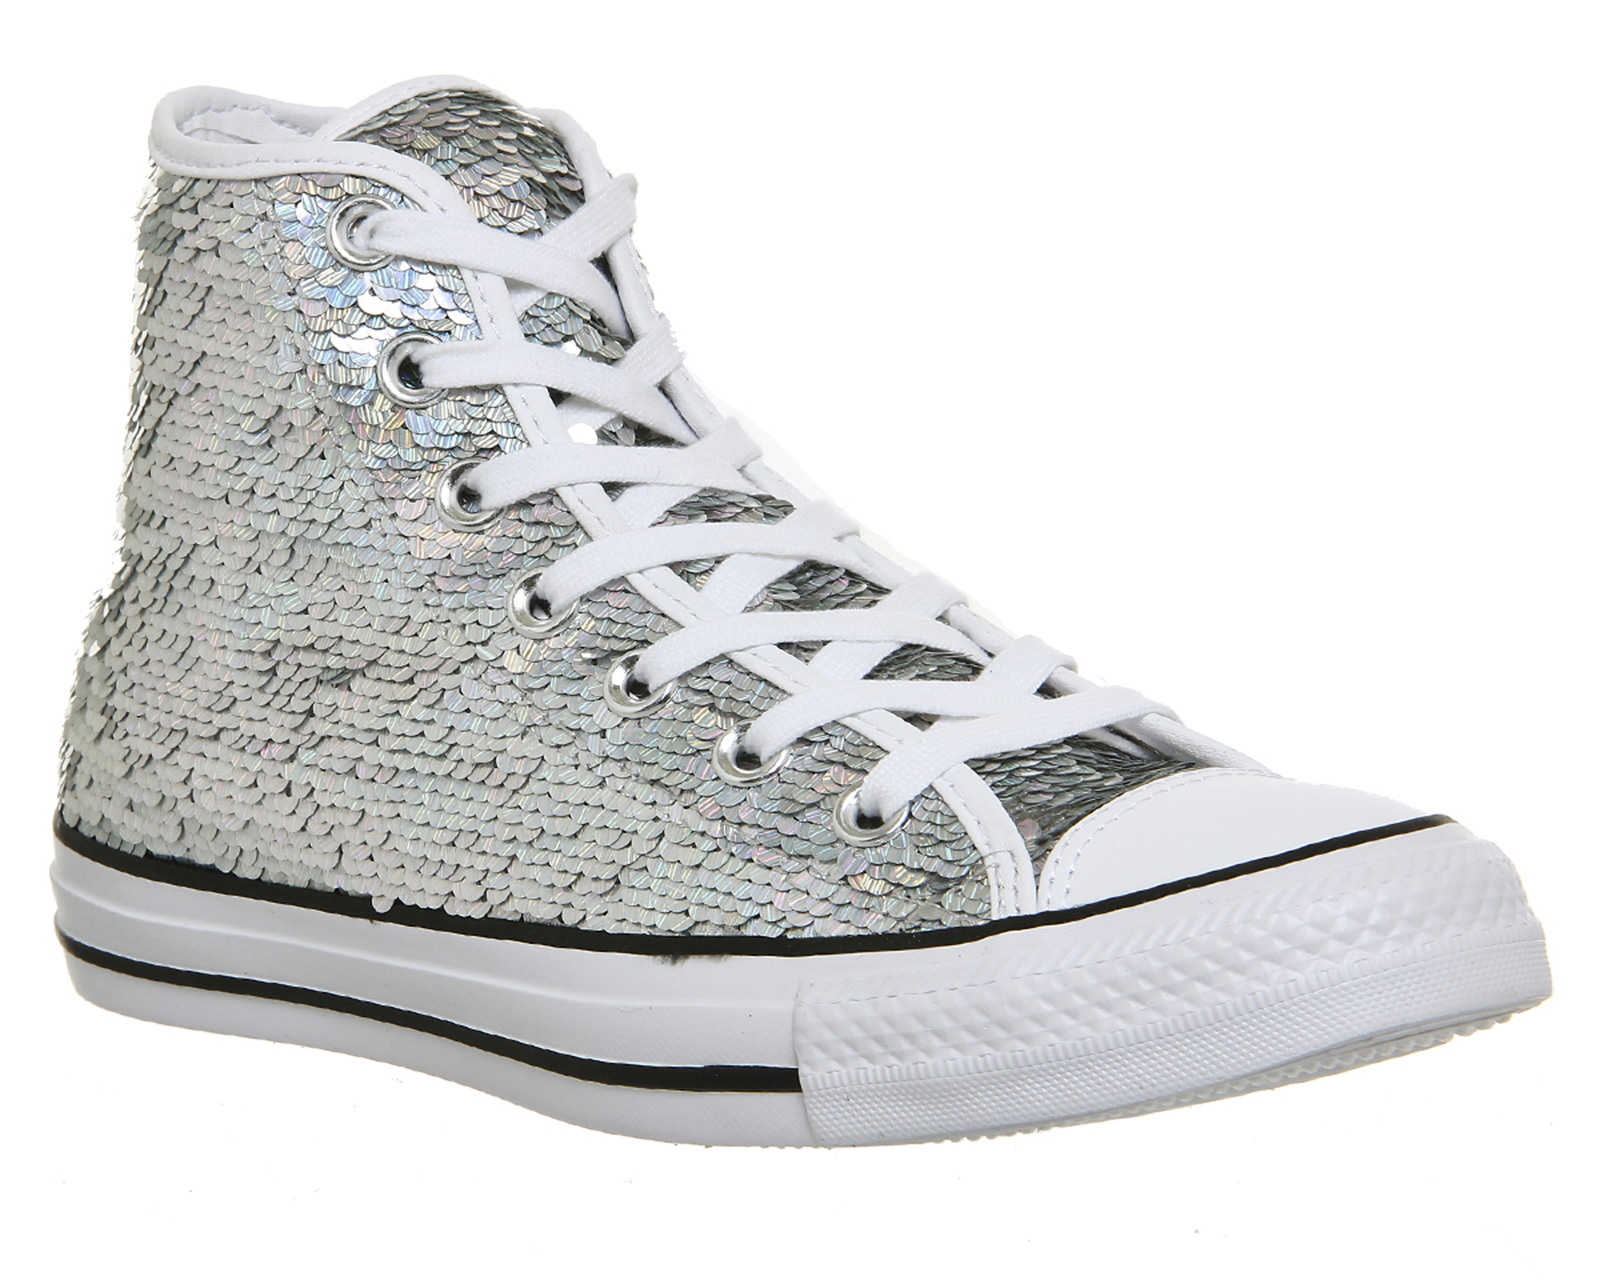 Converse All Star Hi Trainers Silver White Sequin - Women's Trainers